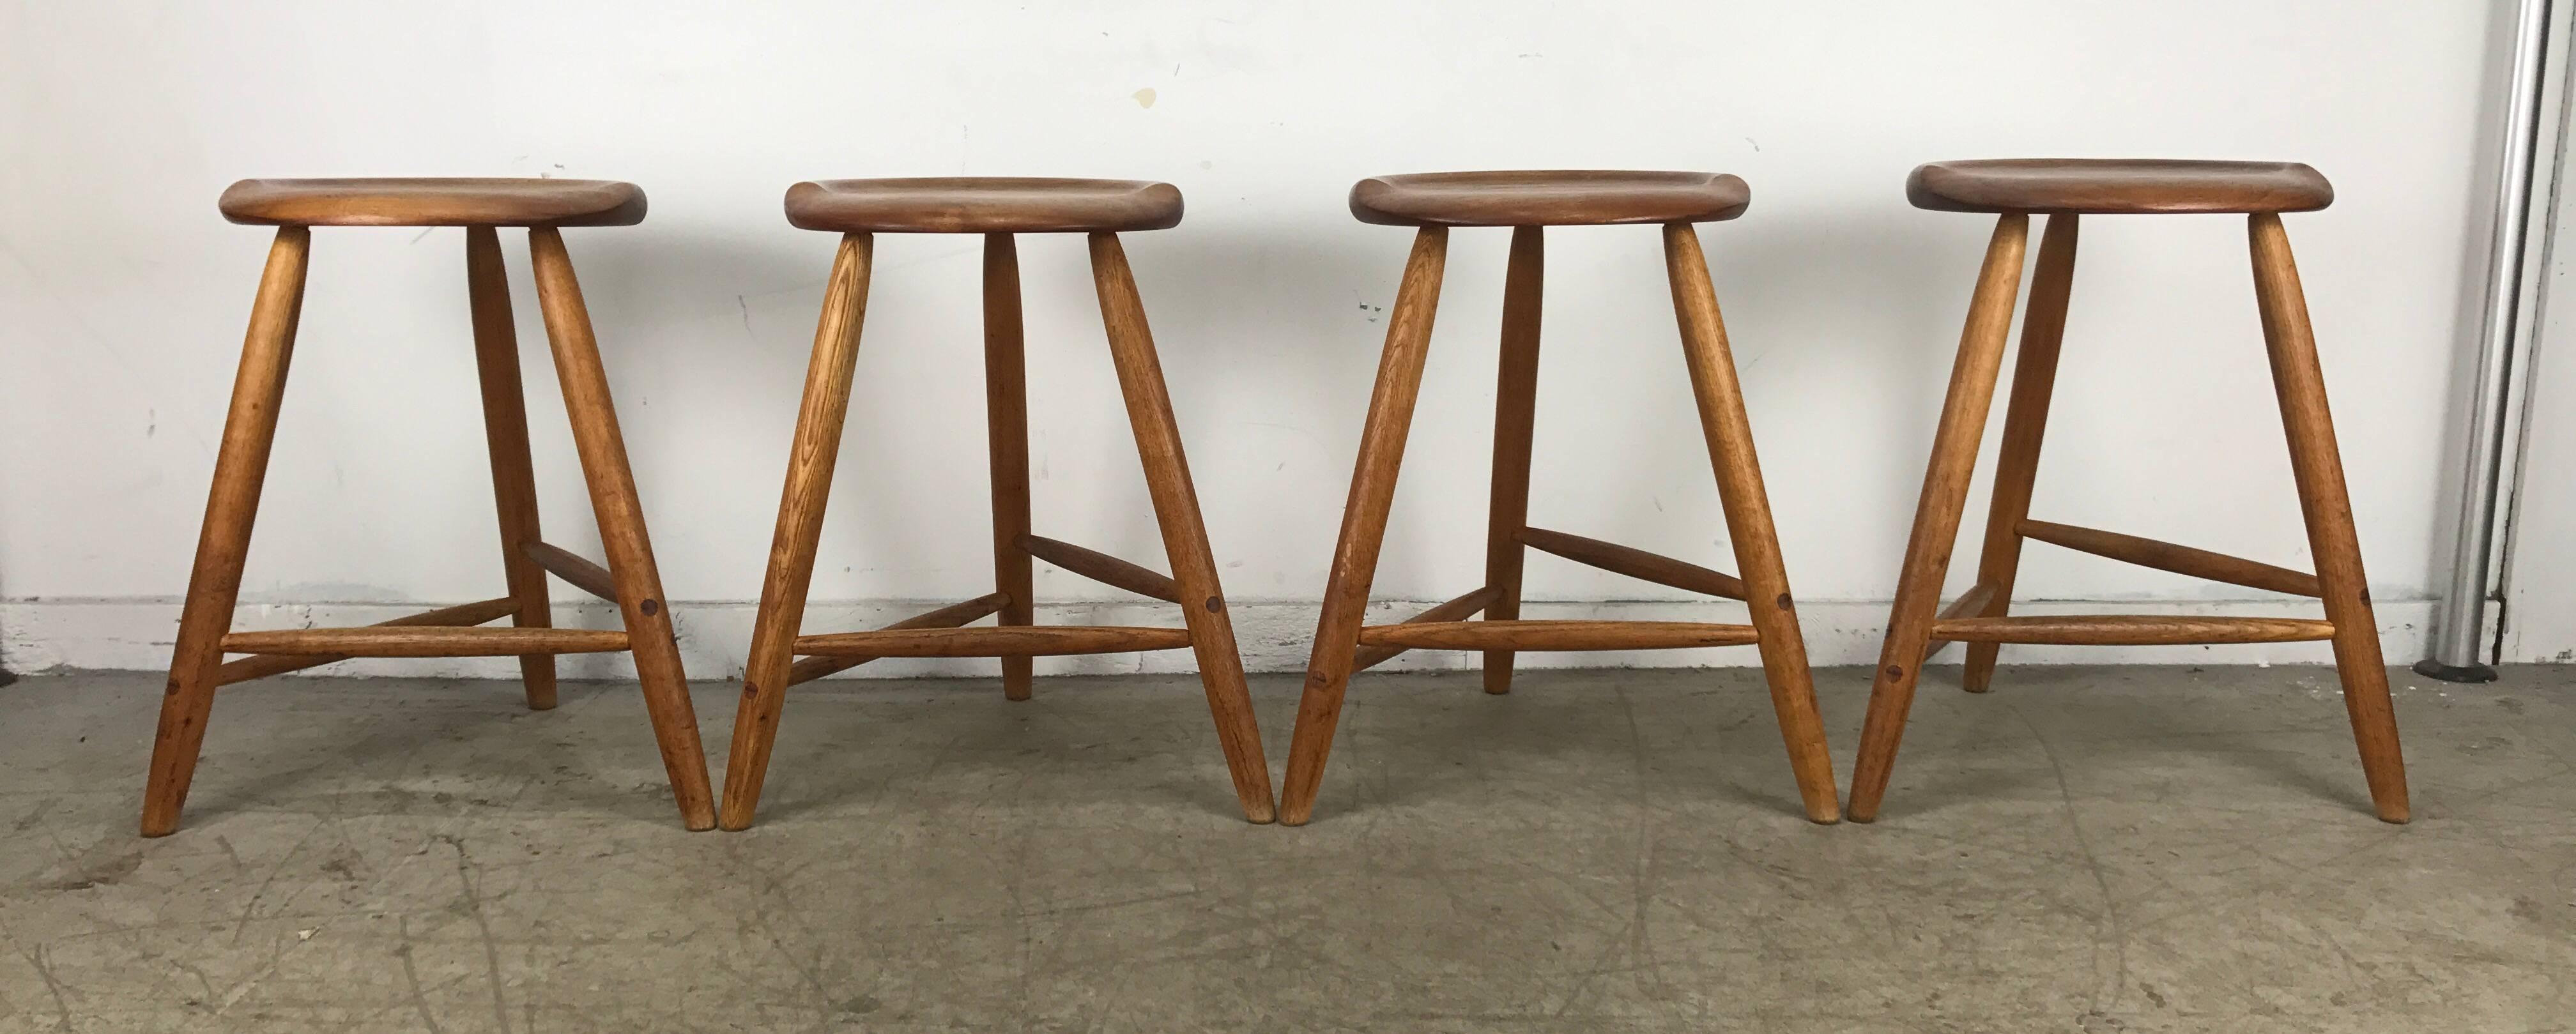 Stunning set of four wooden studio stools with a removable, low backrest made by Pennsylvania craftsman Kai Pedersen.

The stools are signed 'Pedersen Woodworking' with the year of creation (1983). All four have backrests. All handmade,